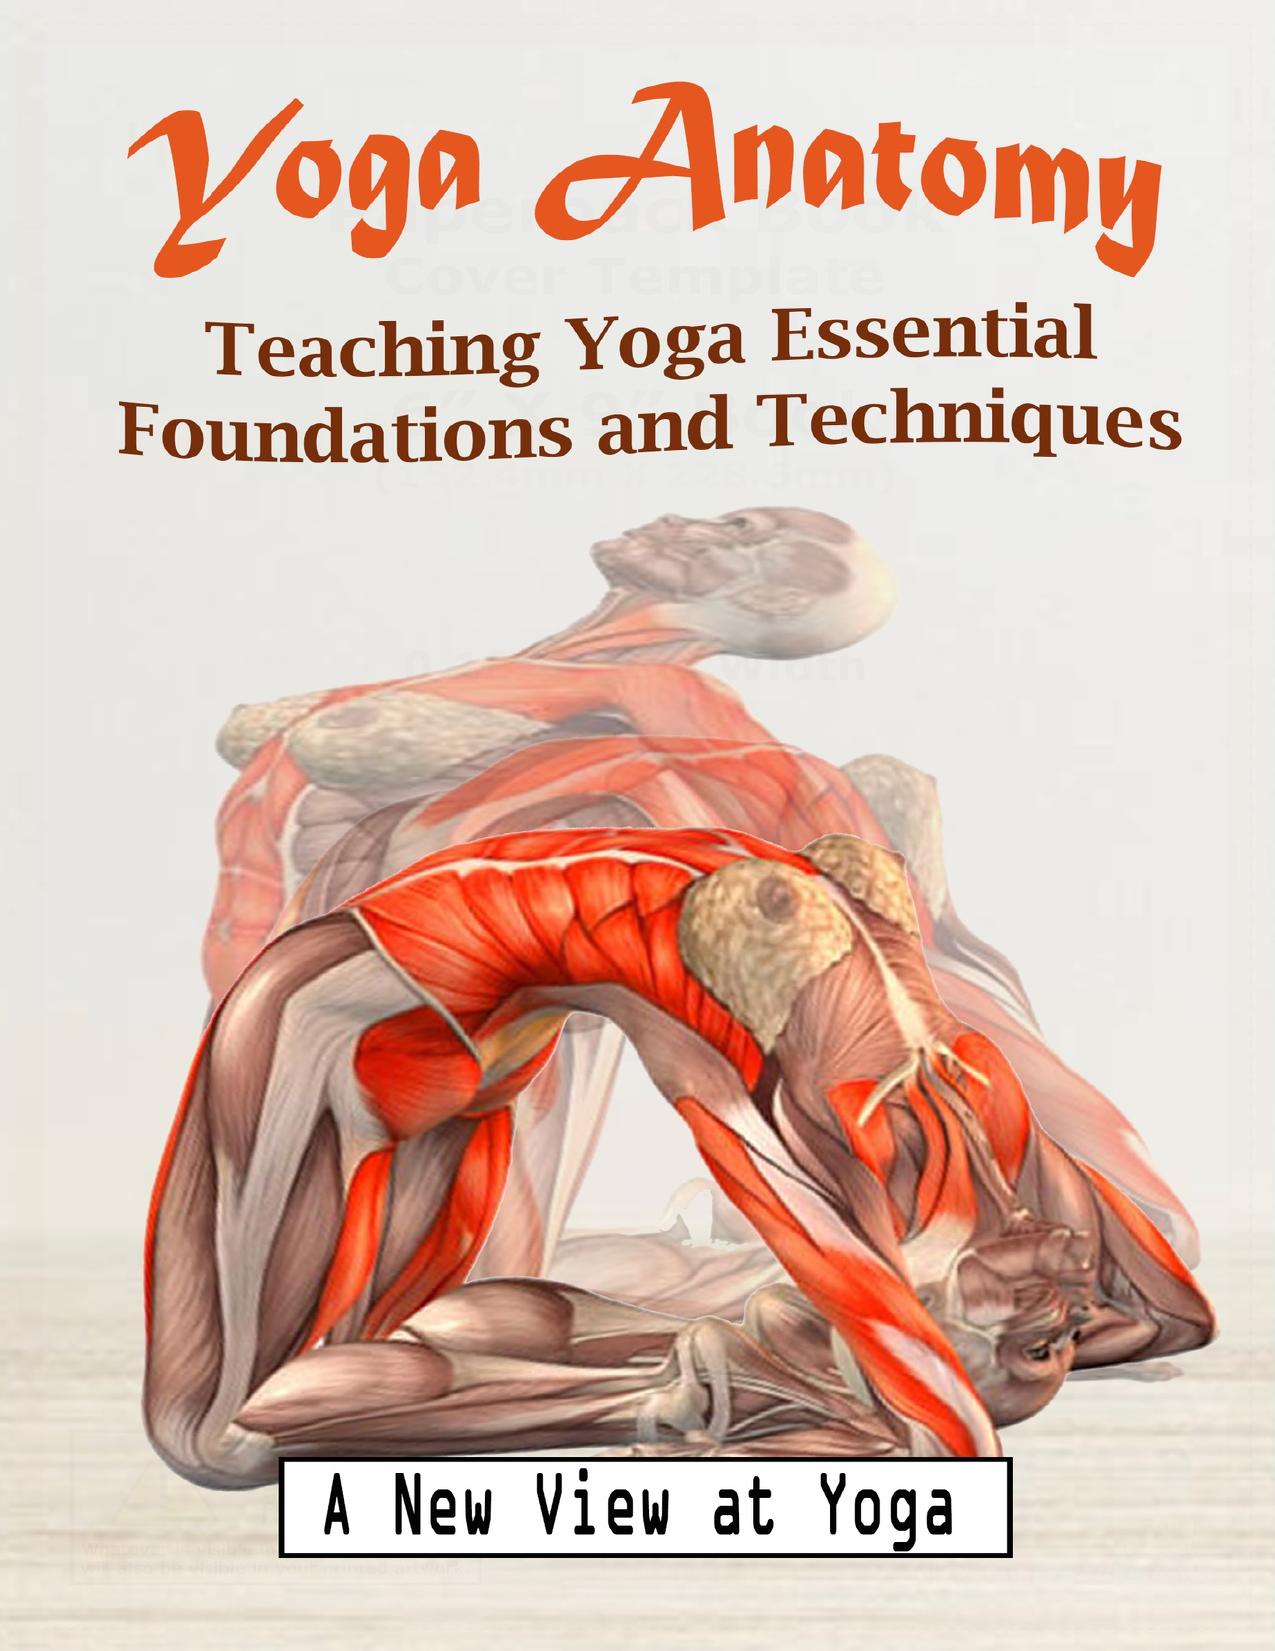 Yoga Anatomy: Teaching Yoga Essential Foundations and Techniques - A New View at Yoga Poses by Thourson Scott